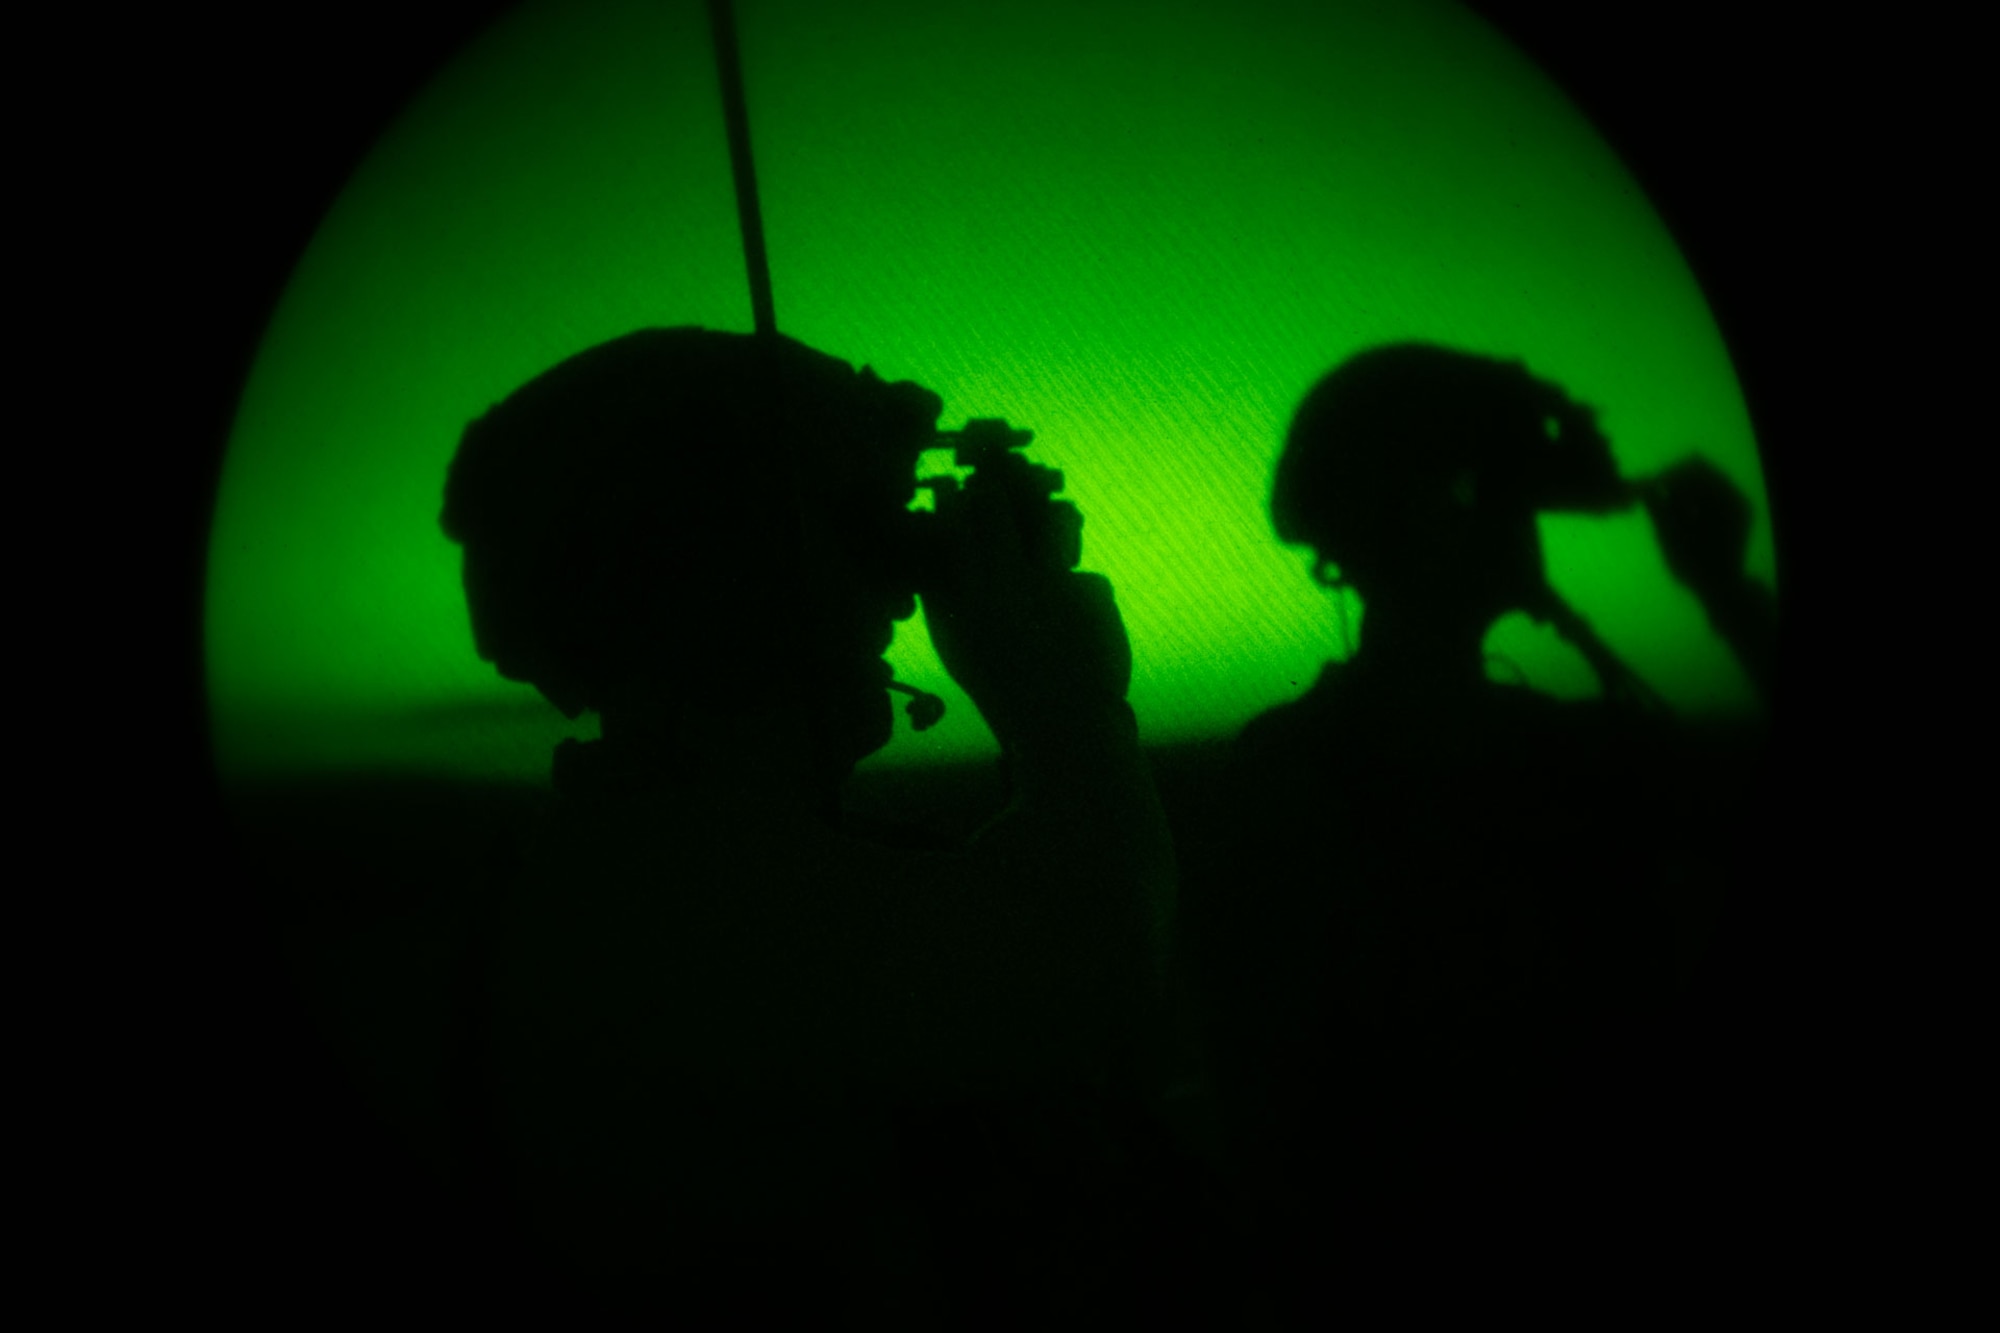 TACPs look through night vision goggles in a green and black image